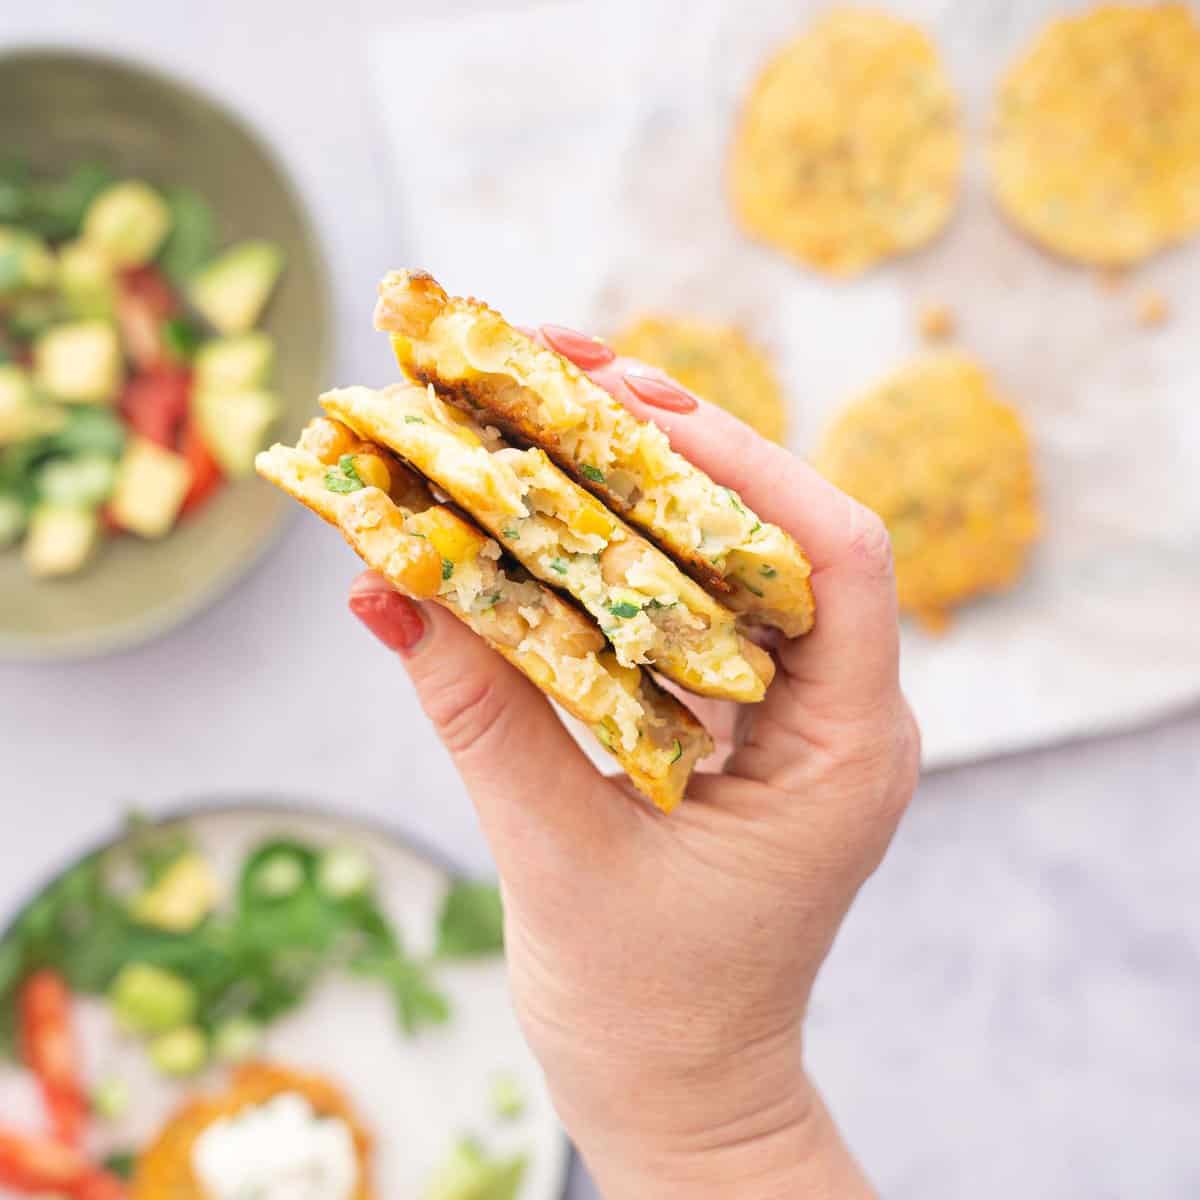 A hand holding three chickpea fritters above a bench of plates full of salads and more chickpea fritters